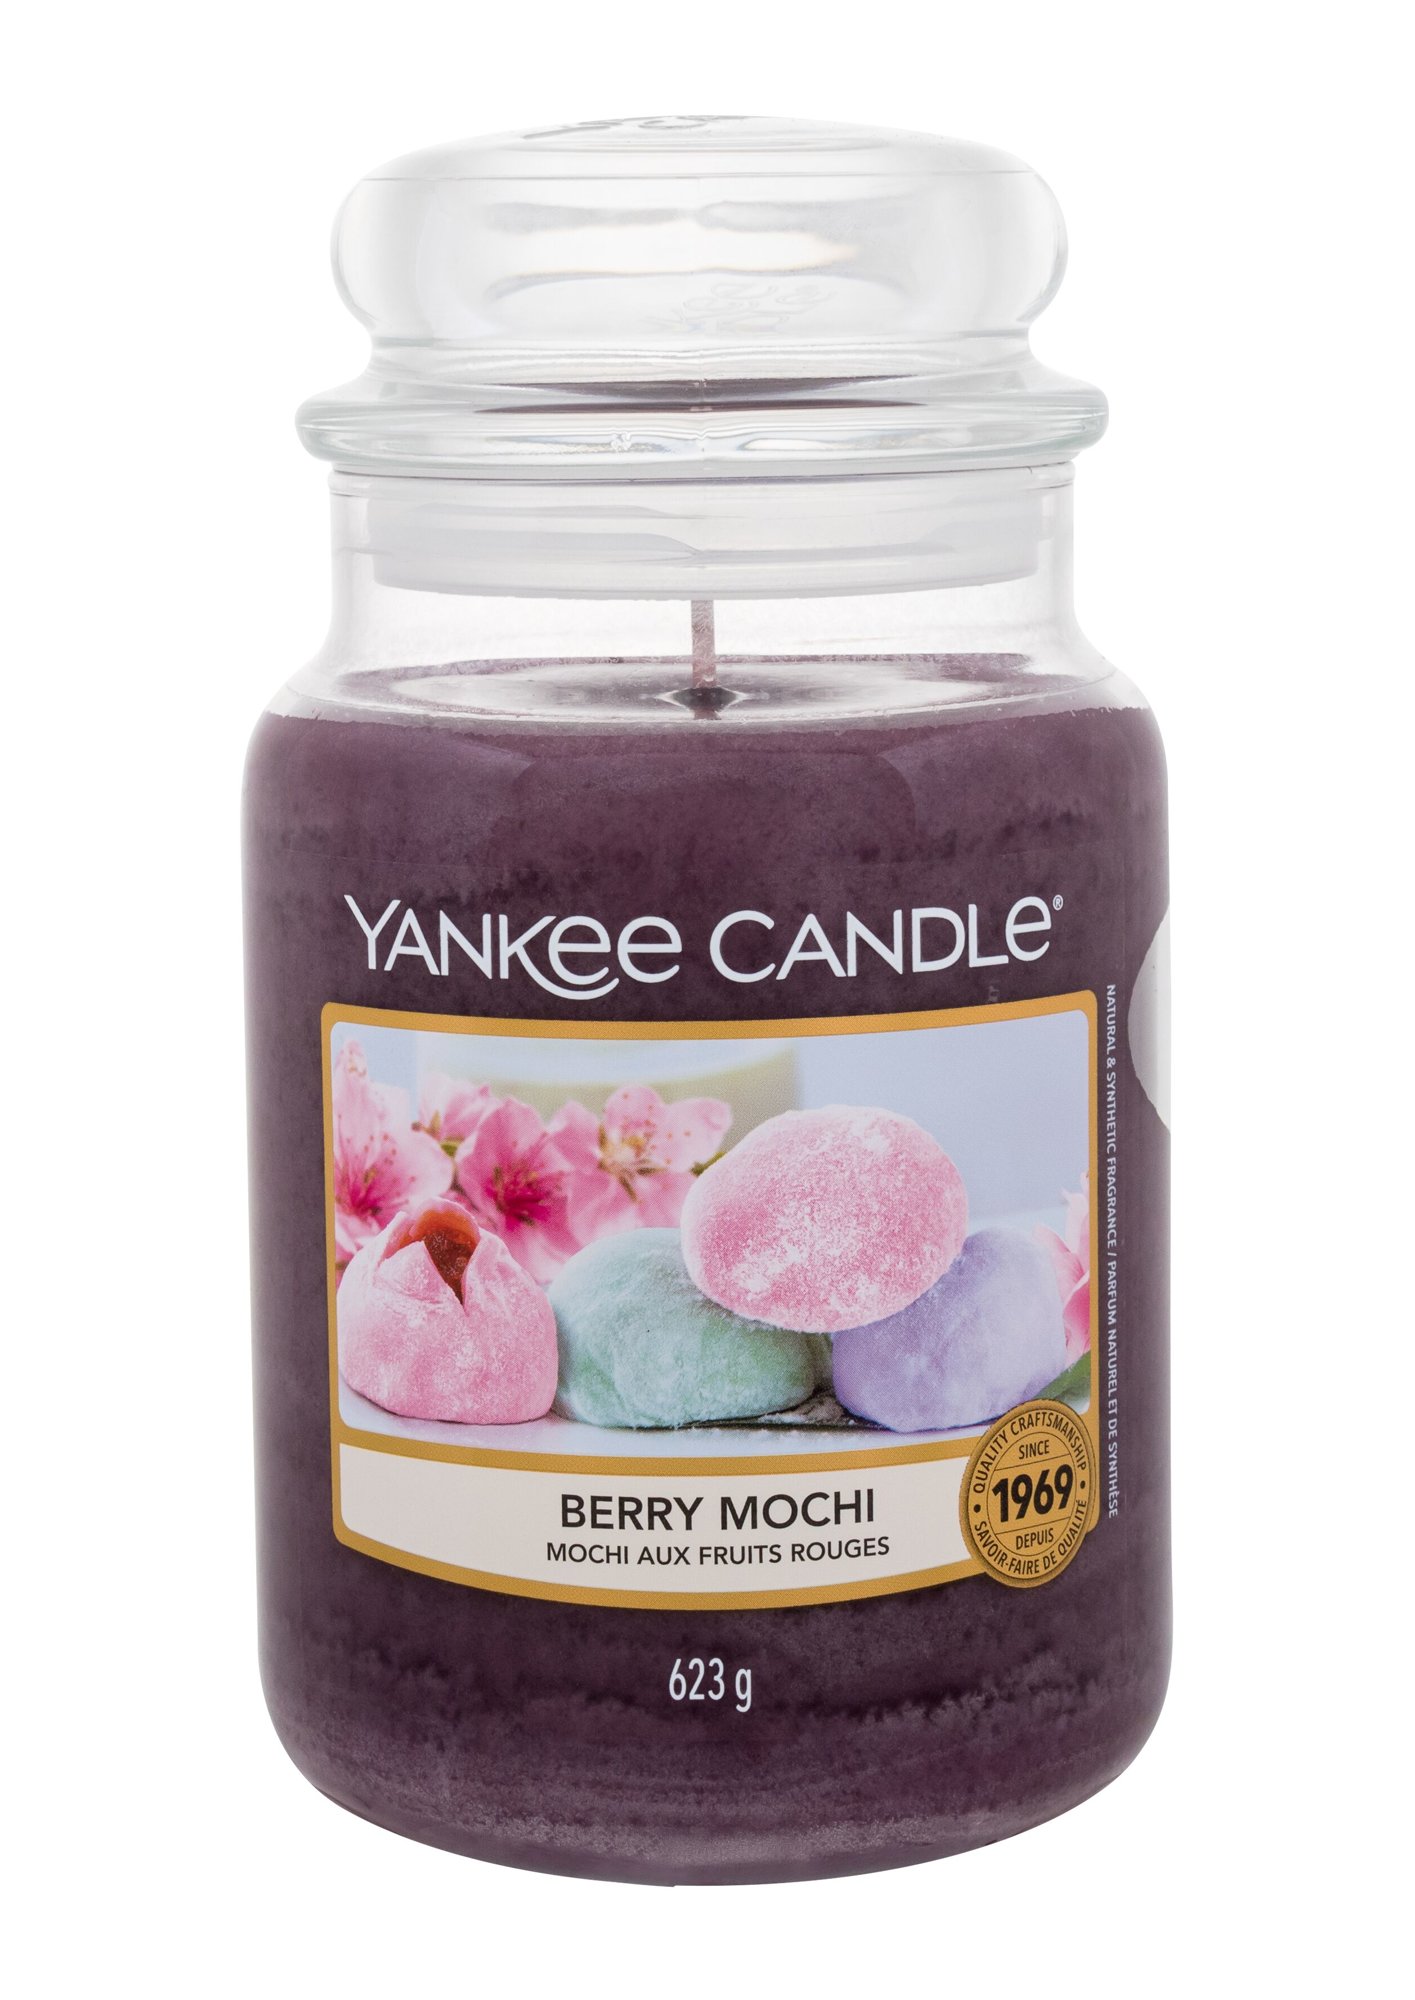 Yankee Candle Berry Mochi 623g Kvepalai Unisex Scented Candle